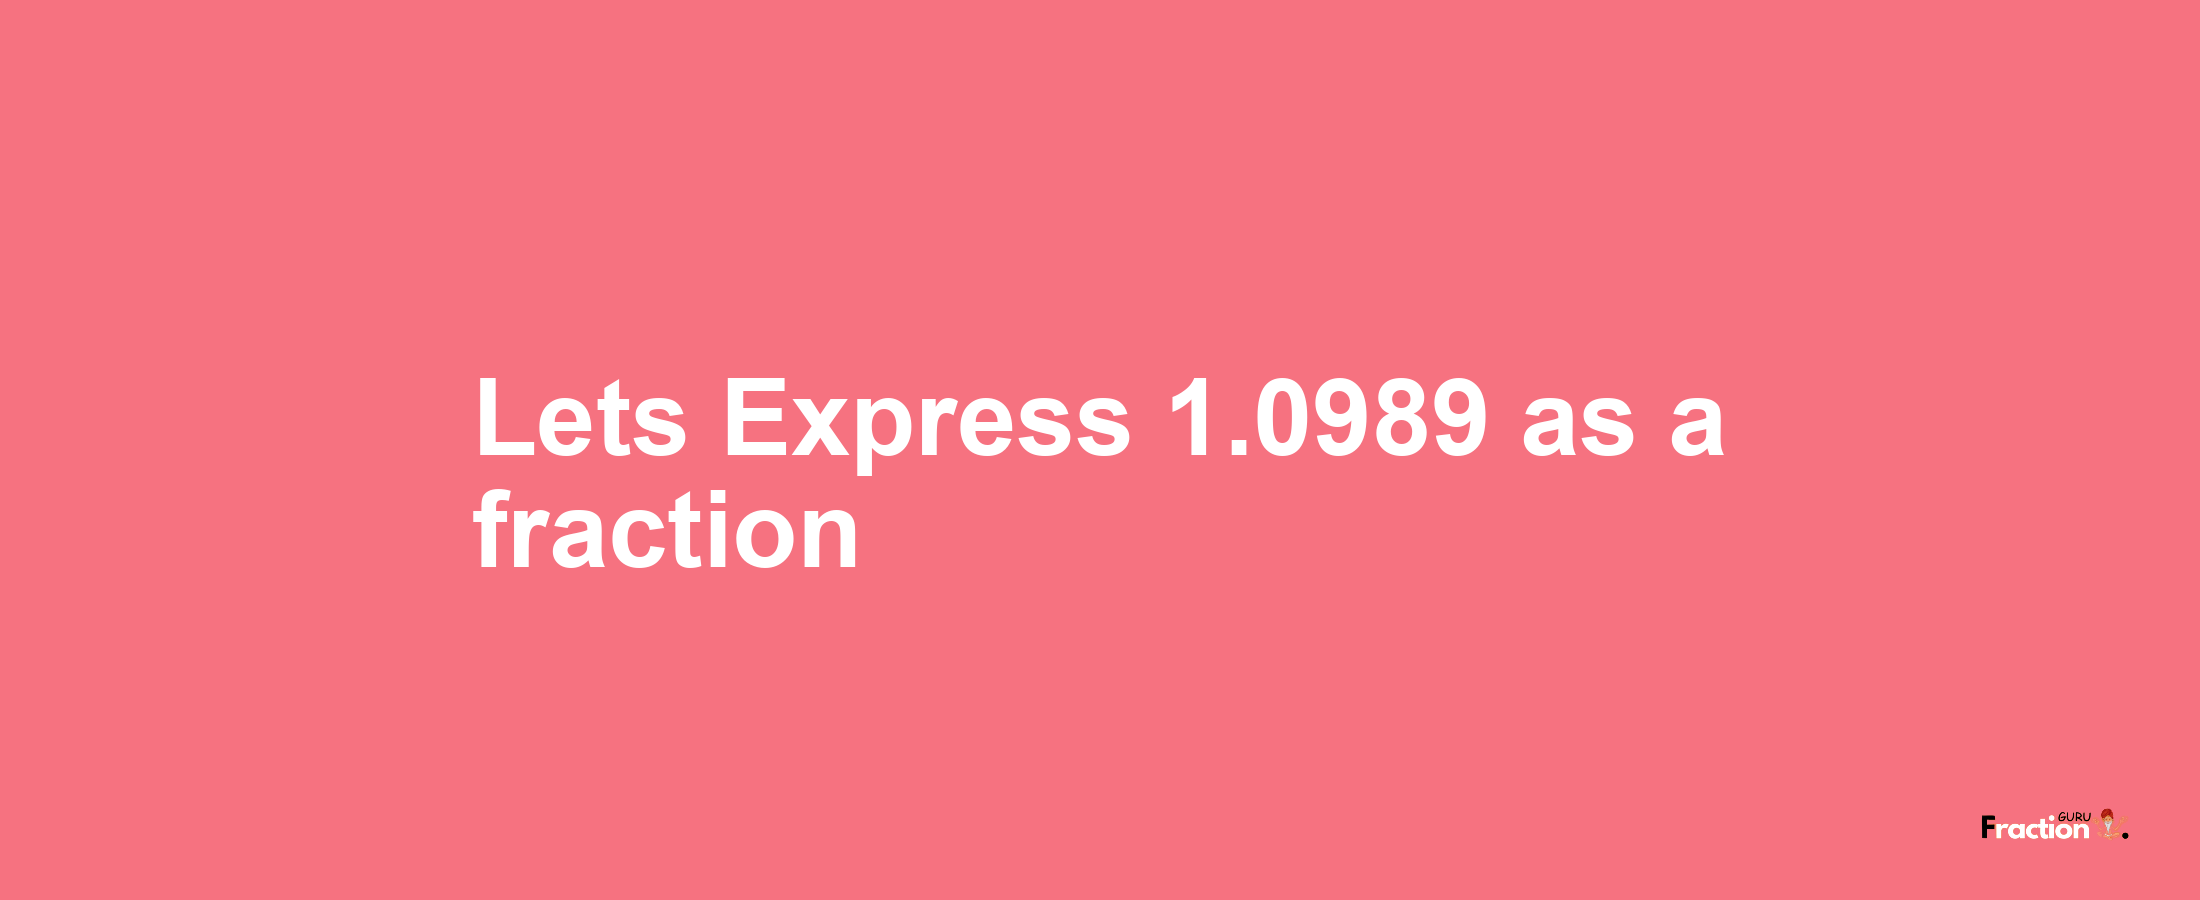 Lets Express 1.0989 as afraction